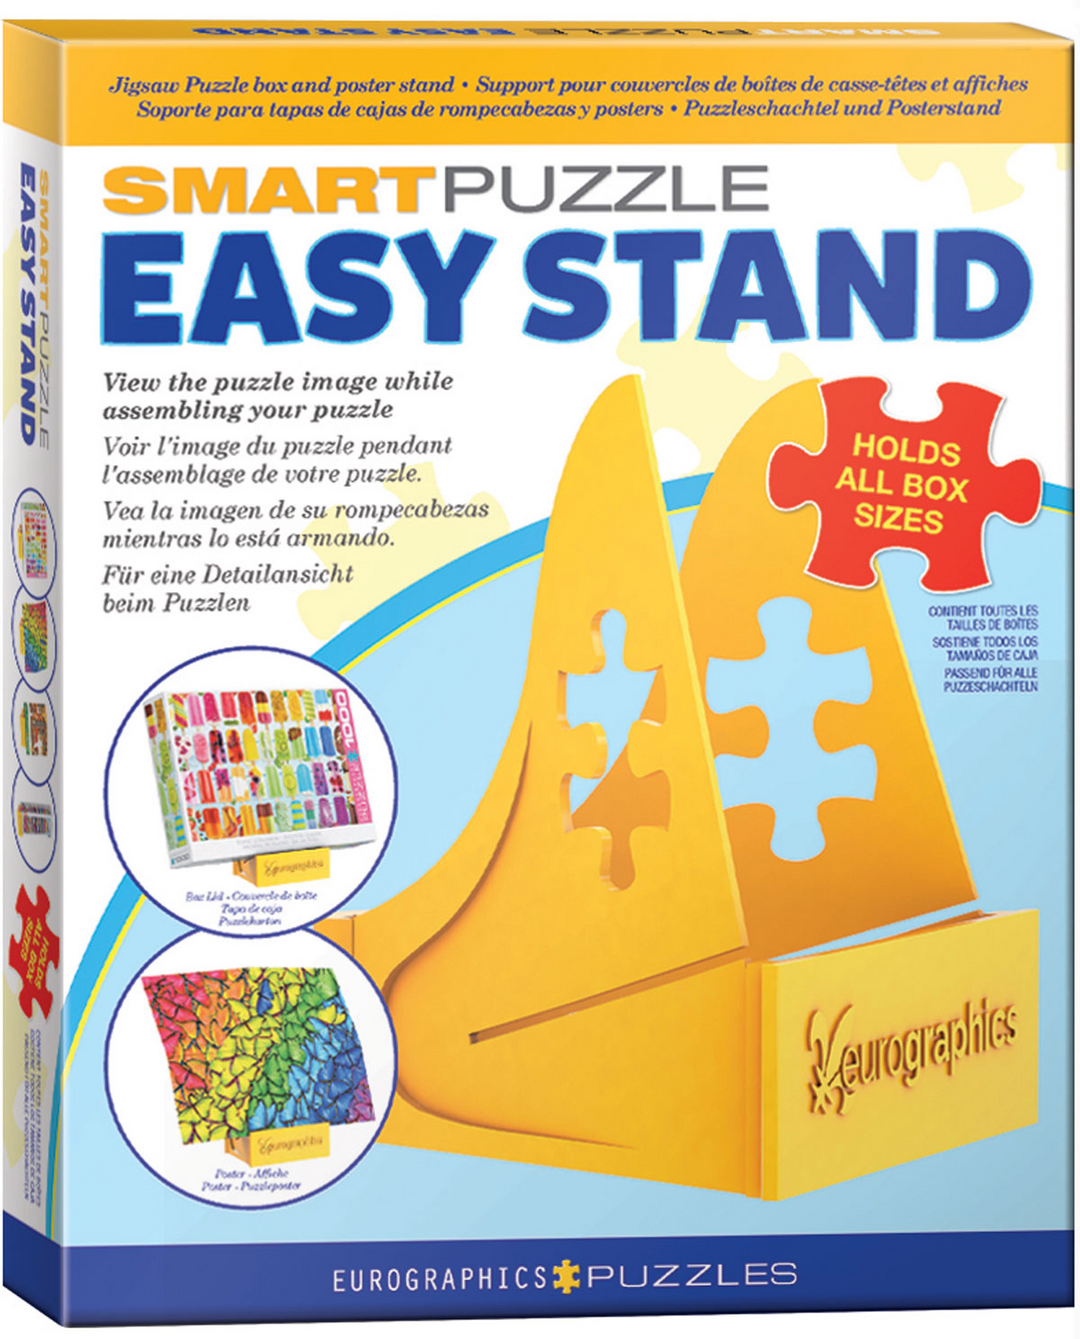 Easy Puzzle Box Stand